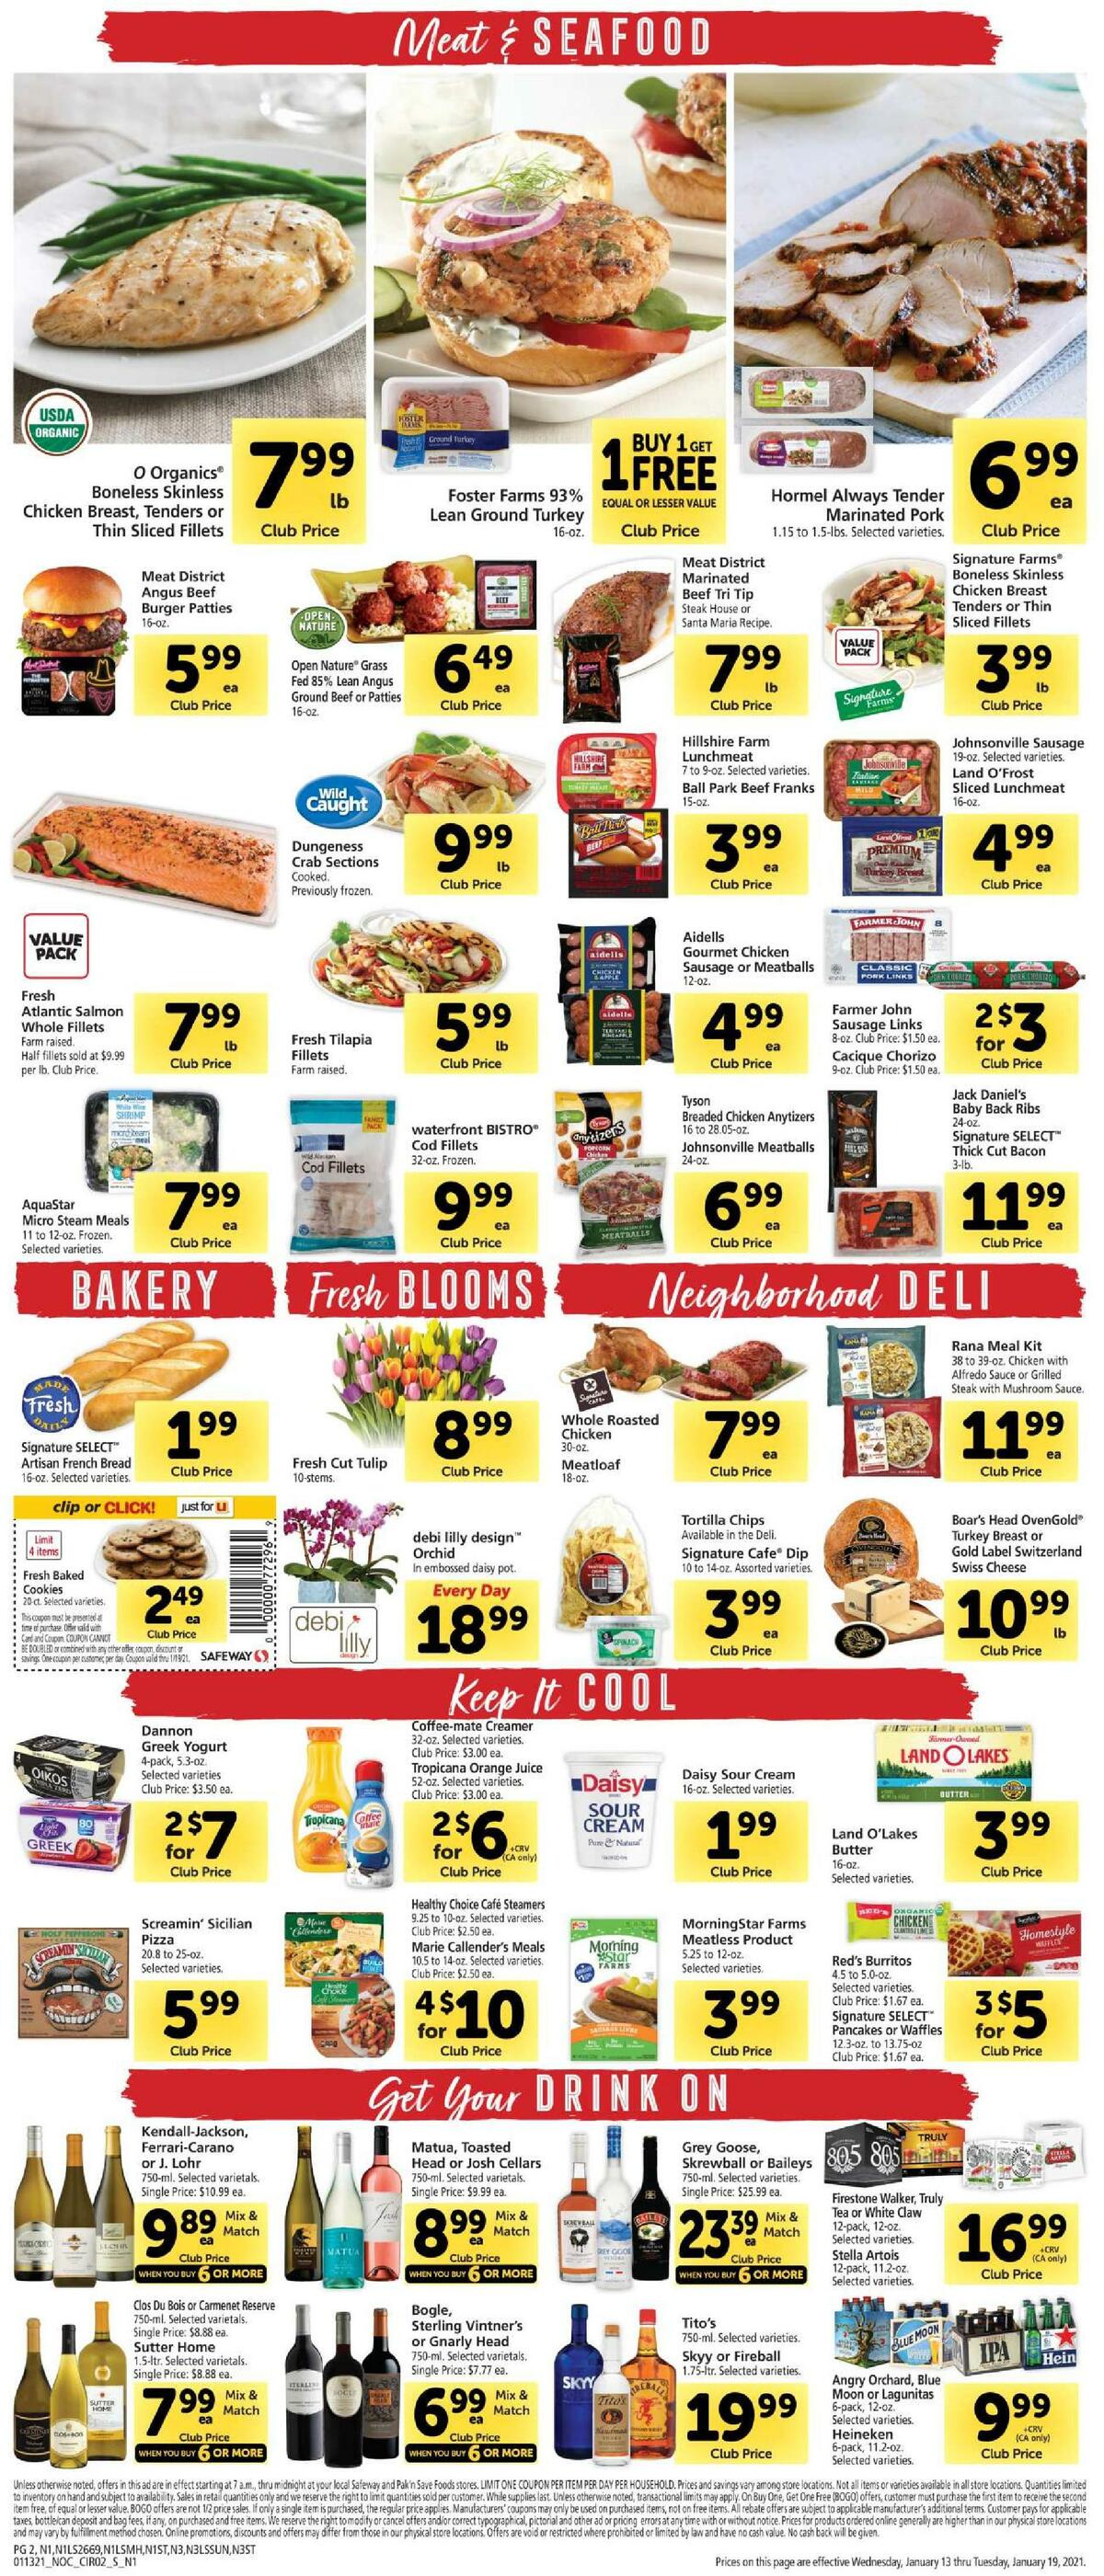 Safeway Weekly Ad from January 13